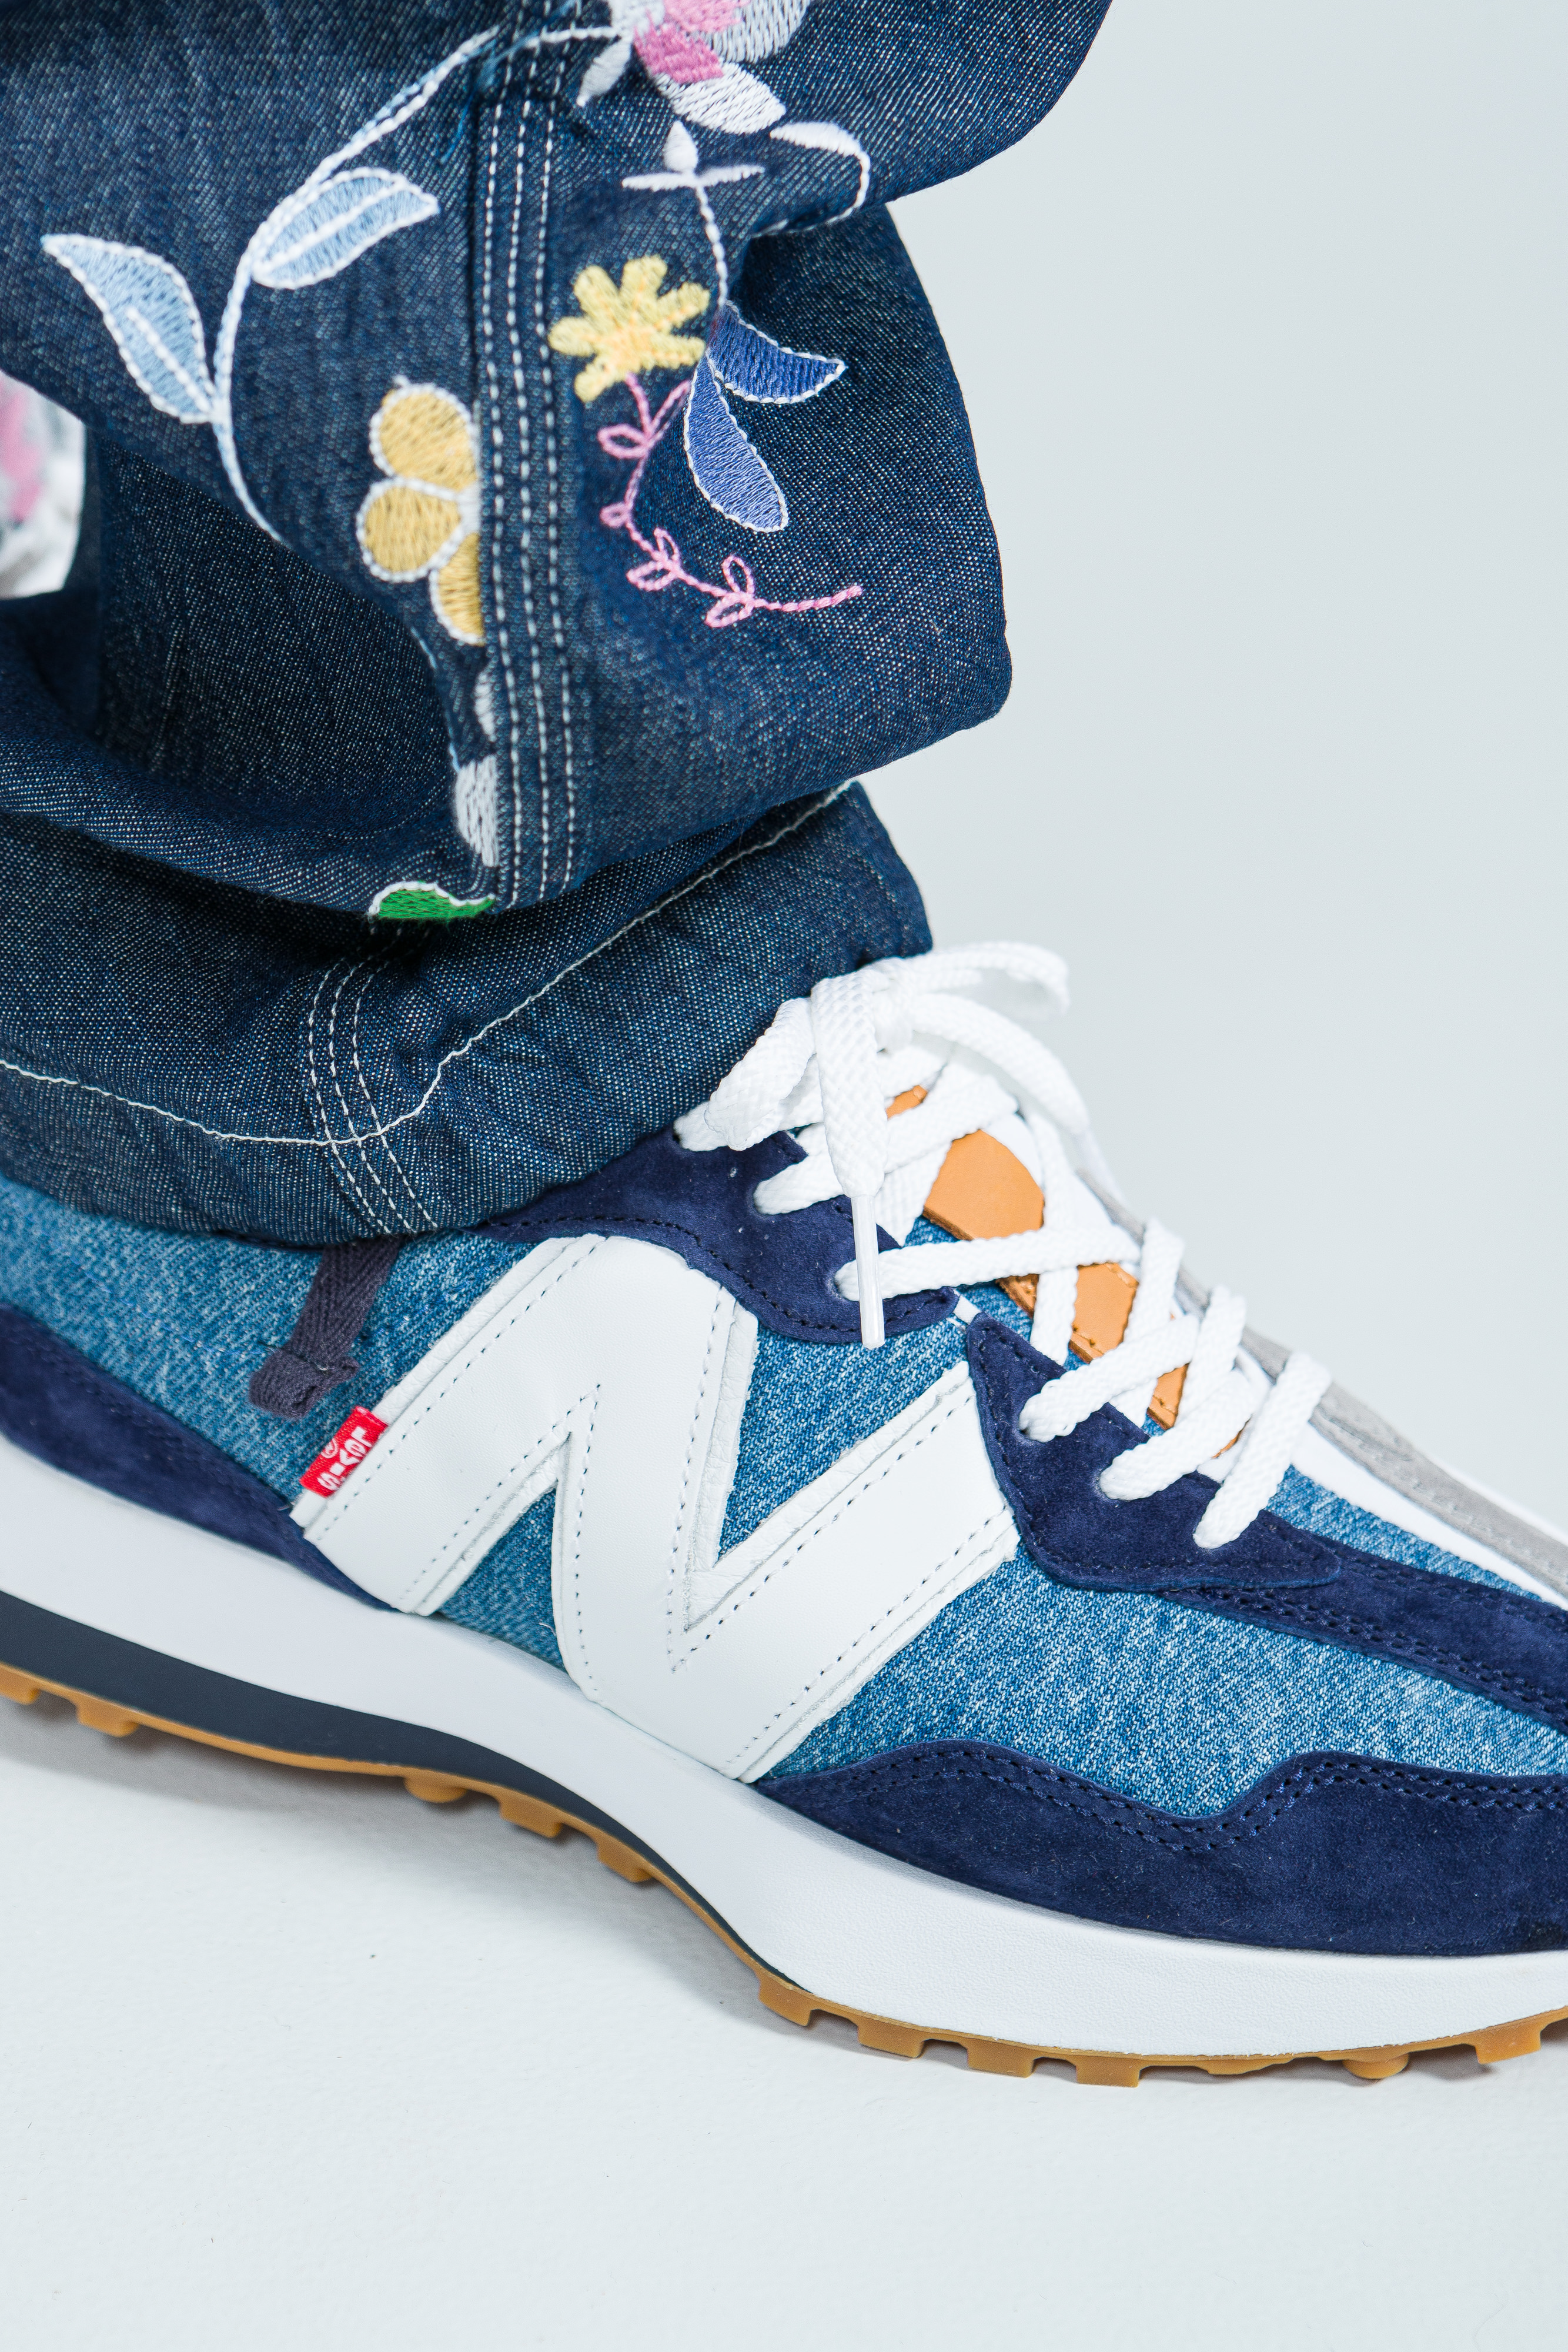 Up There Launches - New Balance X Levi's 327 'Levi's For Feet'